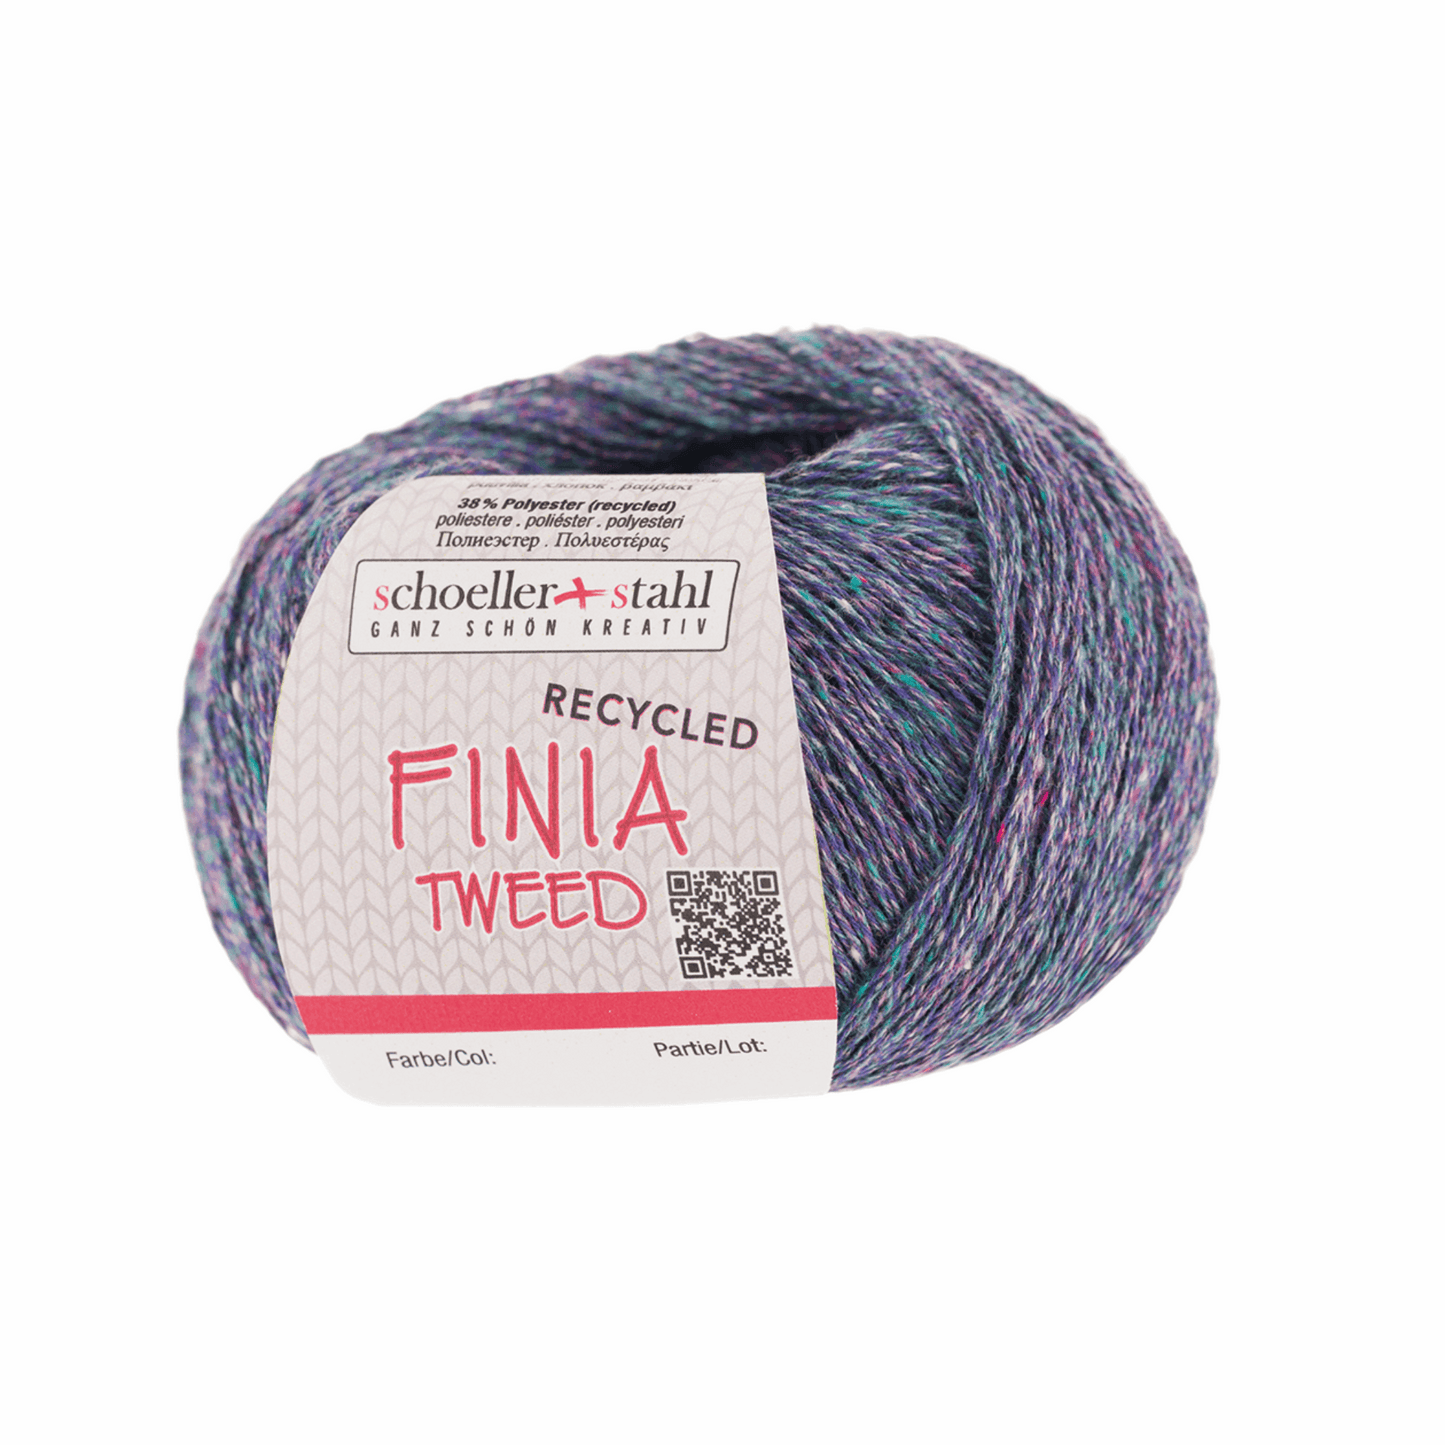 Finia tweed 50g recycled, 90282, Farbe 9, lavendel